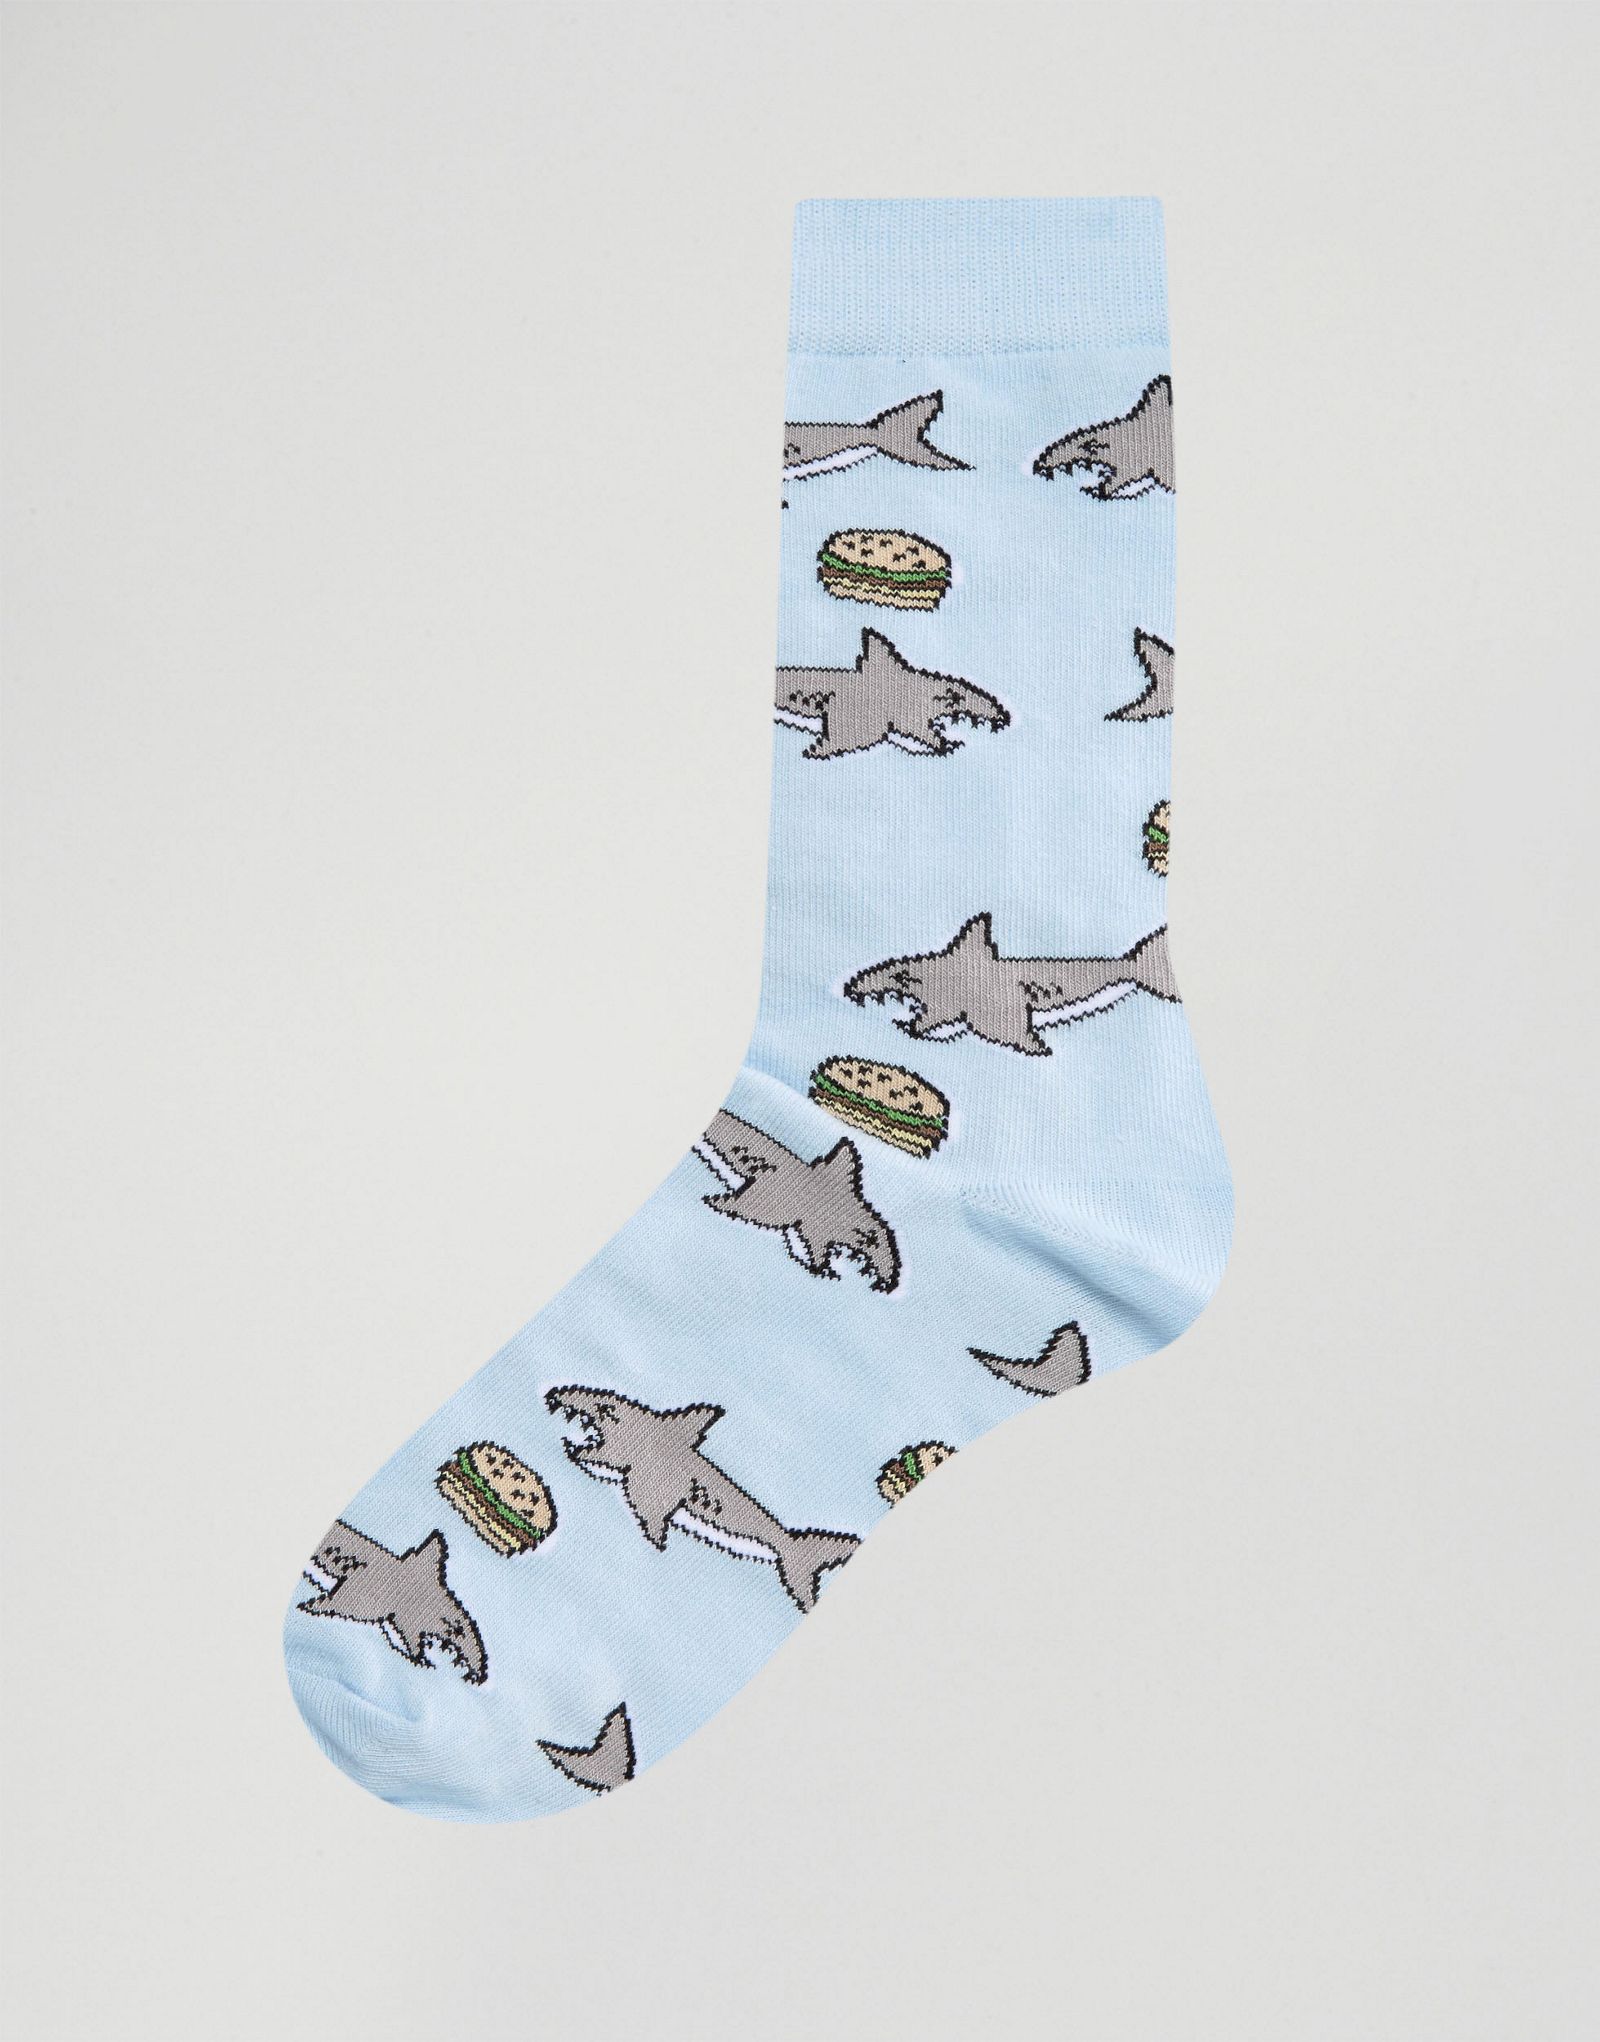 ASOS Socks With Food And Animal Design 5 Pack